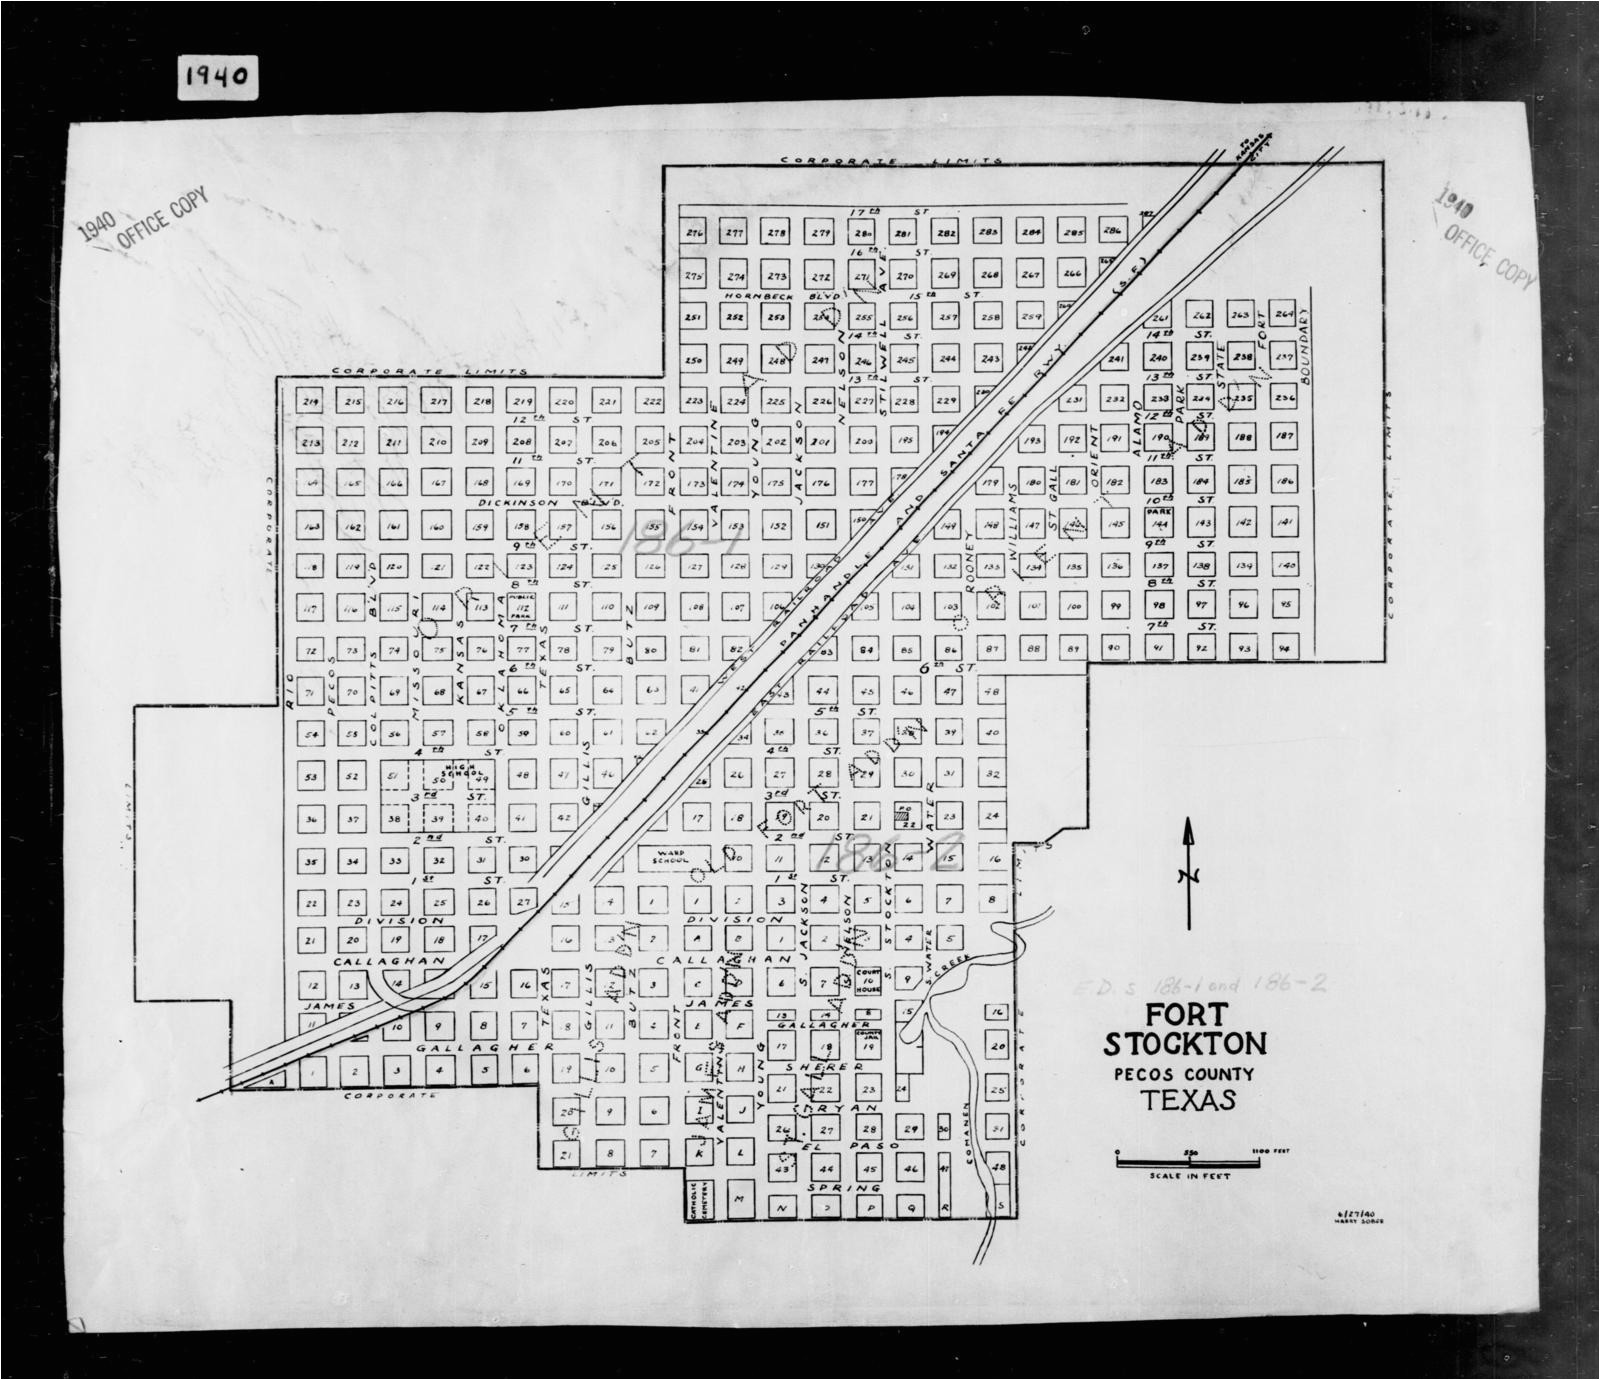 Fort Stockton Texas Map 1940 Census Enumeration District Maps Texas Pecos County Fort Of Fort Stockton Texas Map 